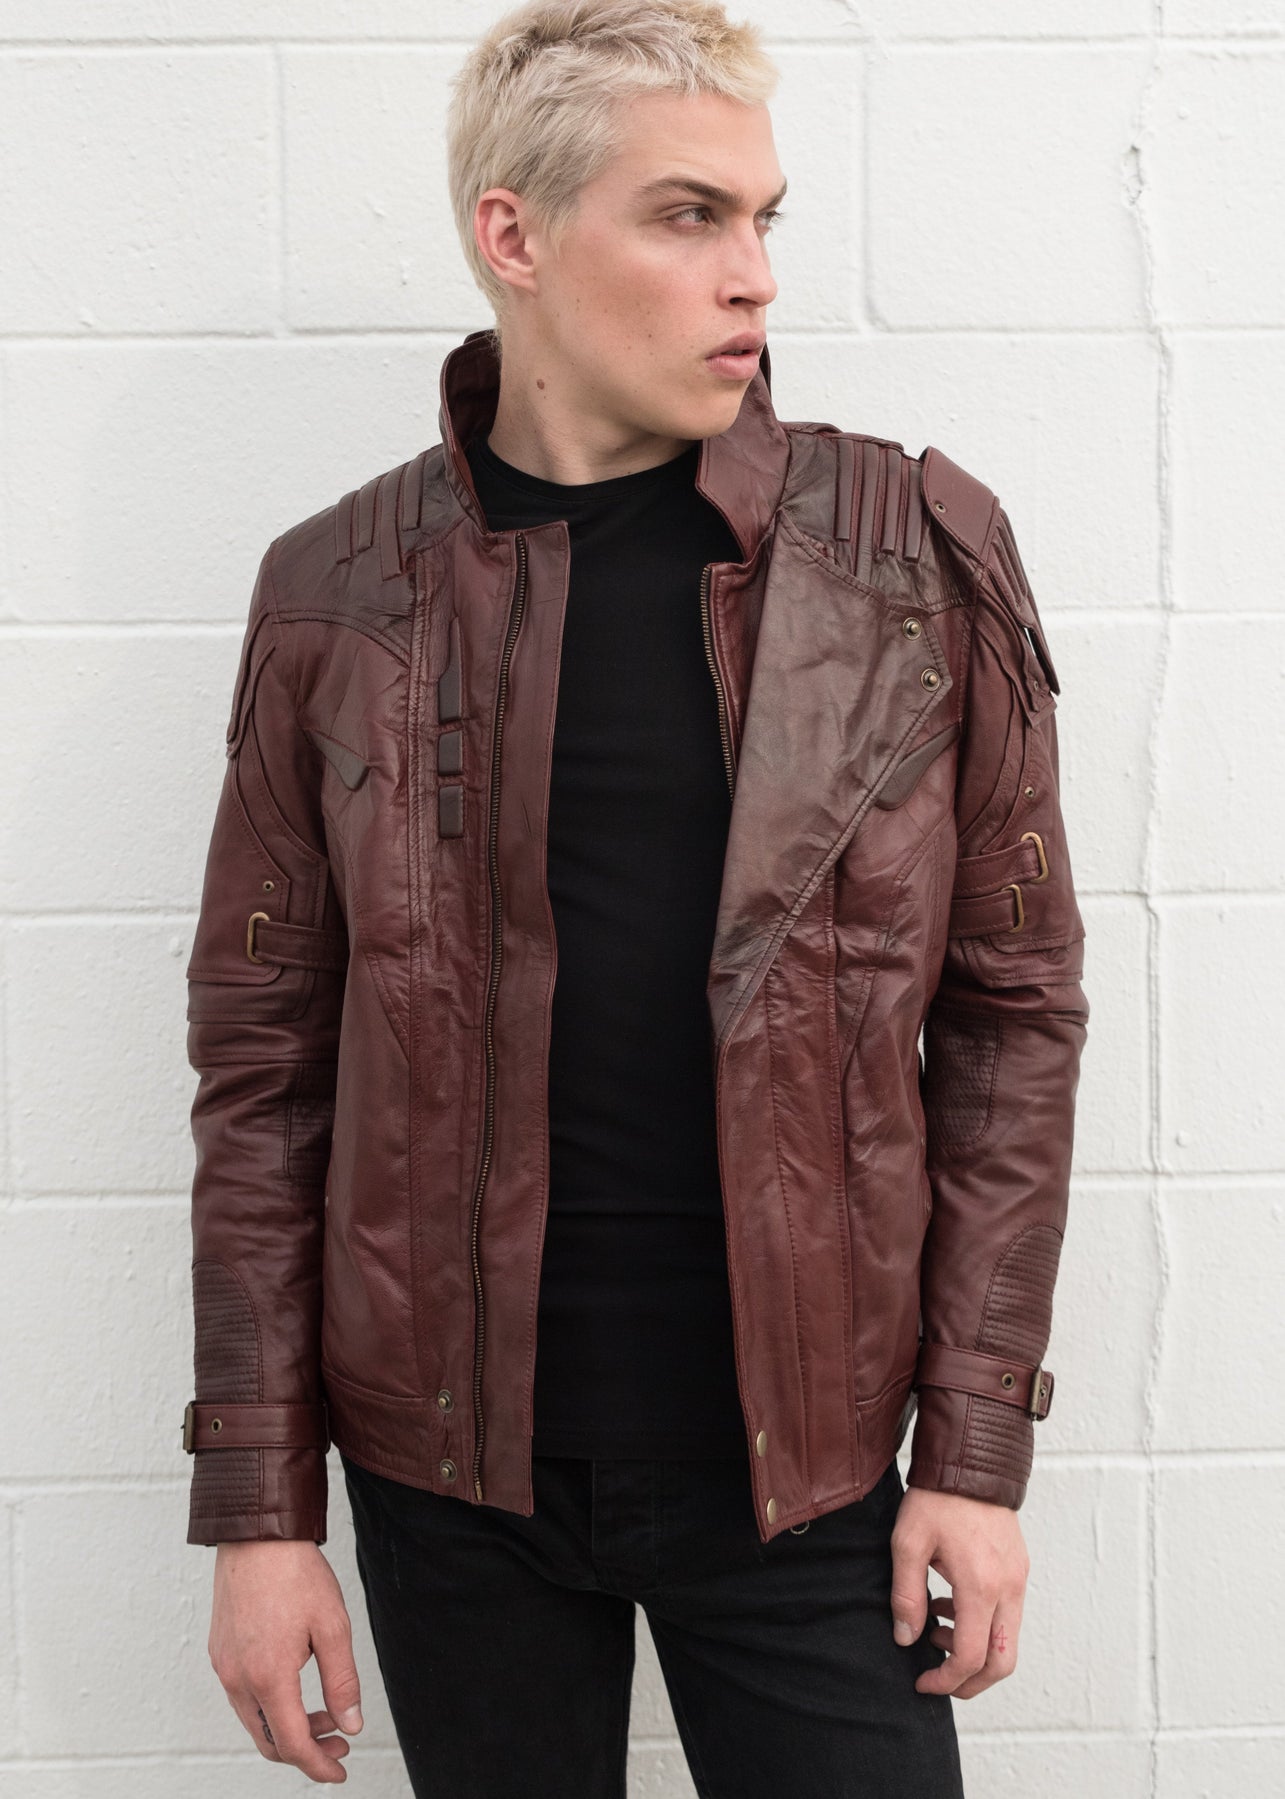 Star-Lord Guardians of the Galaxy (Marvel) Mens Dark Red Leather Jacket by Luca Designs